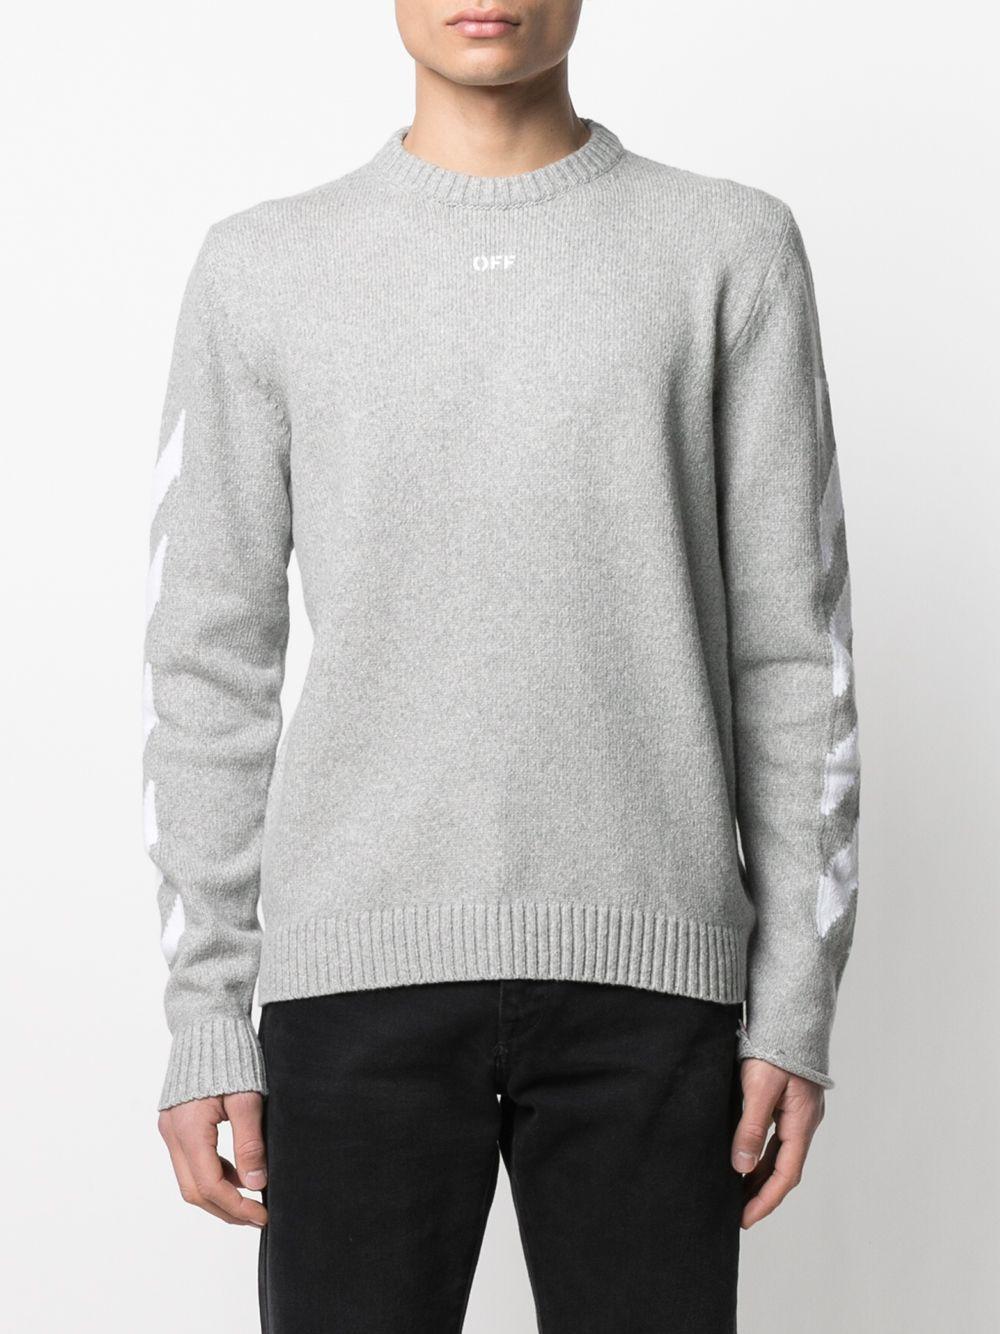 Off-White c/o Virgil Abloh Cotton Off White Sweaters for Men - Lyst